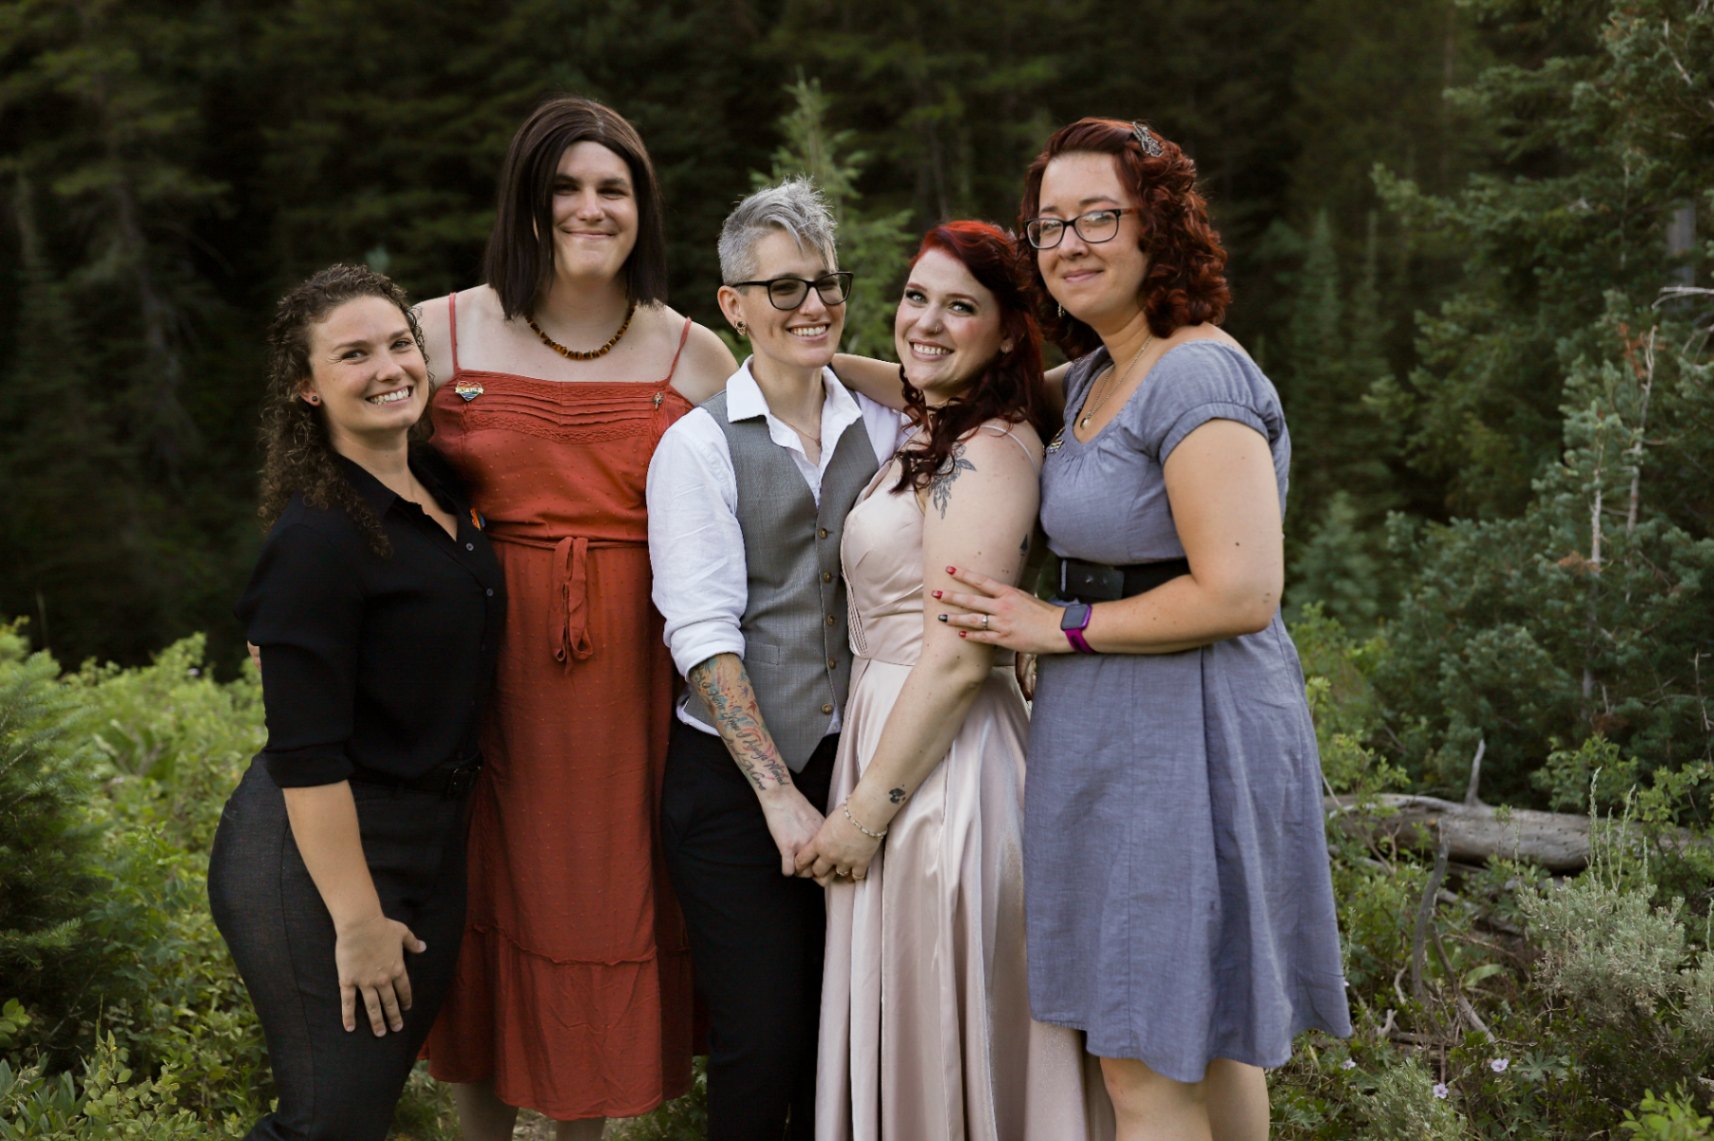 Two brides (both white, one with short gray hair, one with long dark red hair) stand with their chosen family at their outdoor wedding